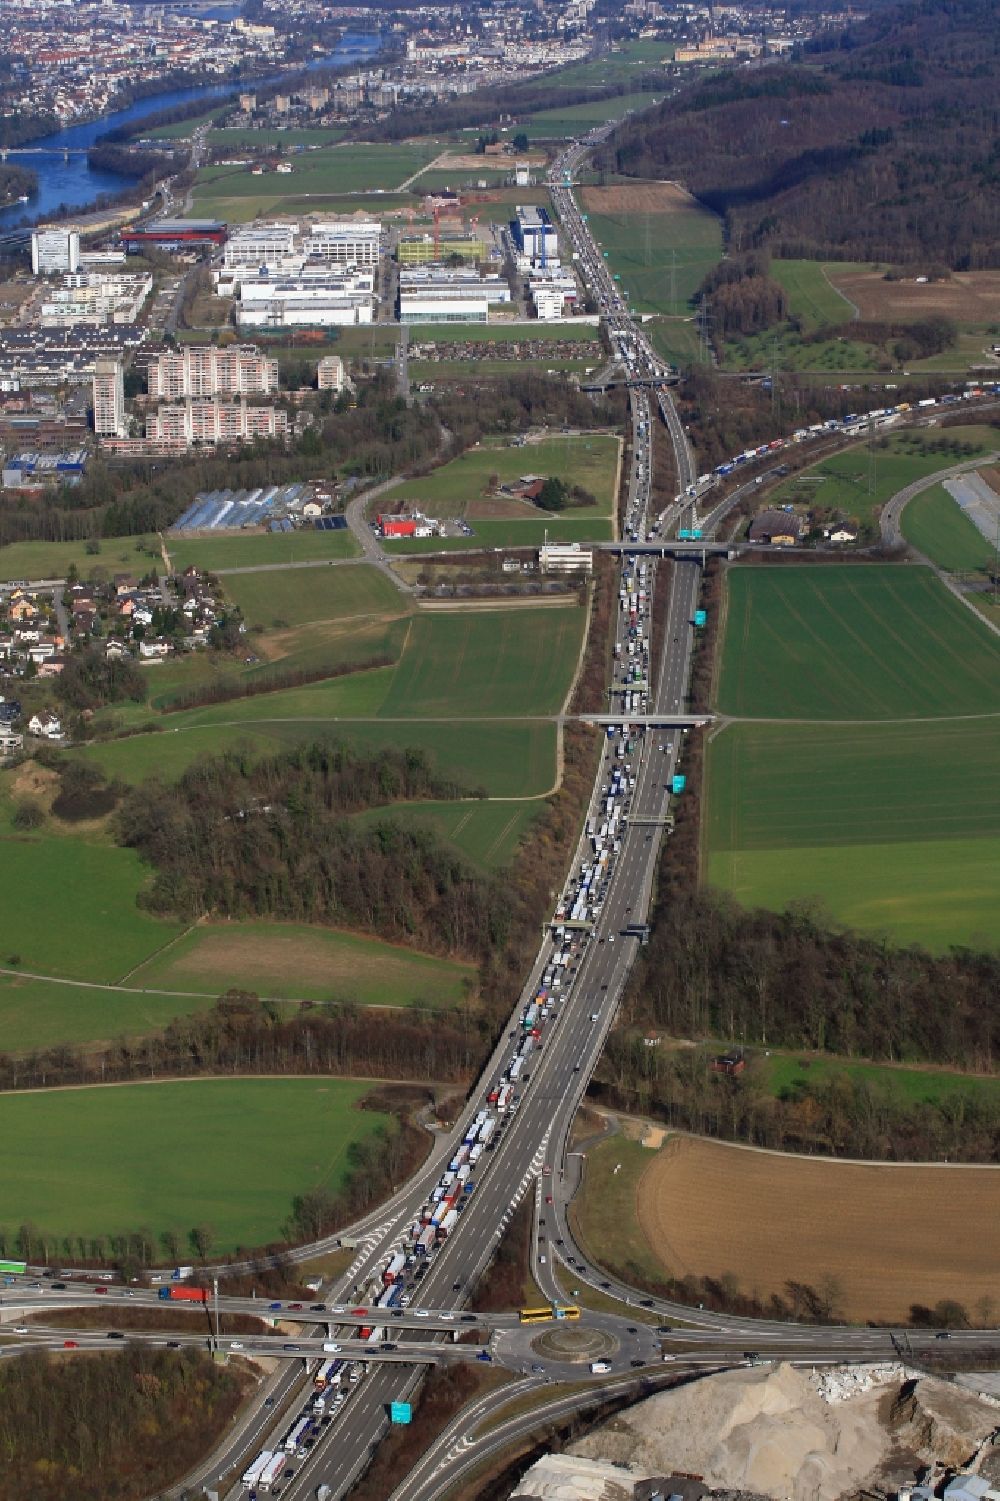 Pratteln from the bird's eye view: Highway congestion along the route of the lanes of motorway A3 in Pratteln in the canton Basel-Landschaft, Switzerland